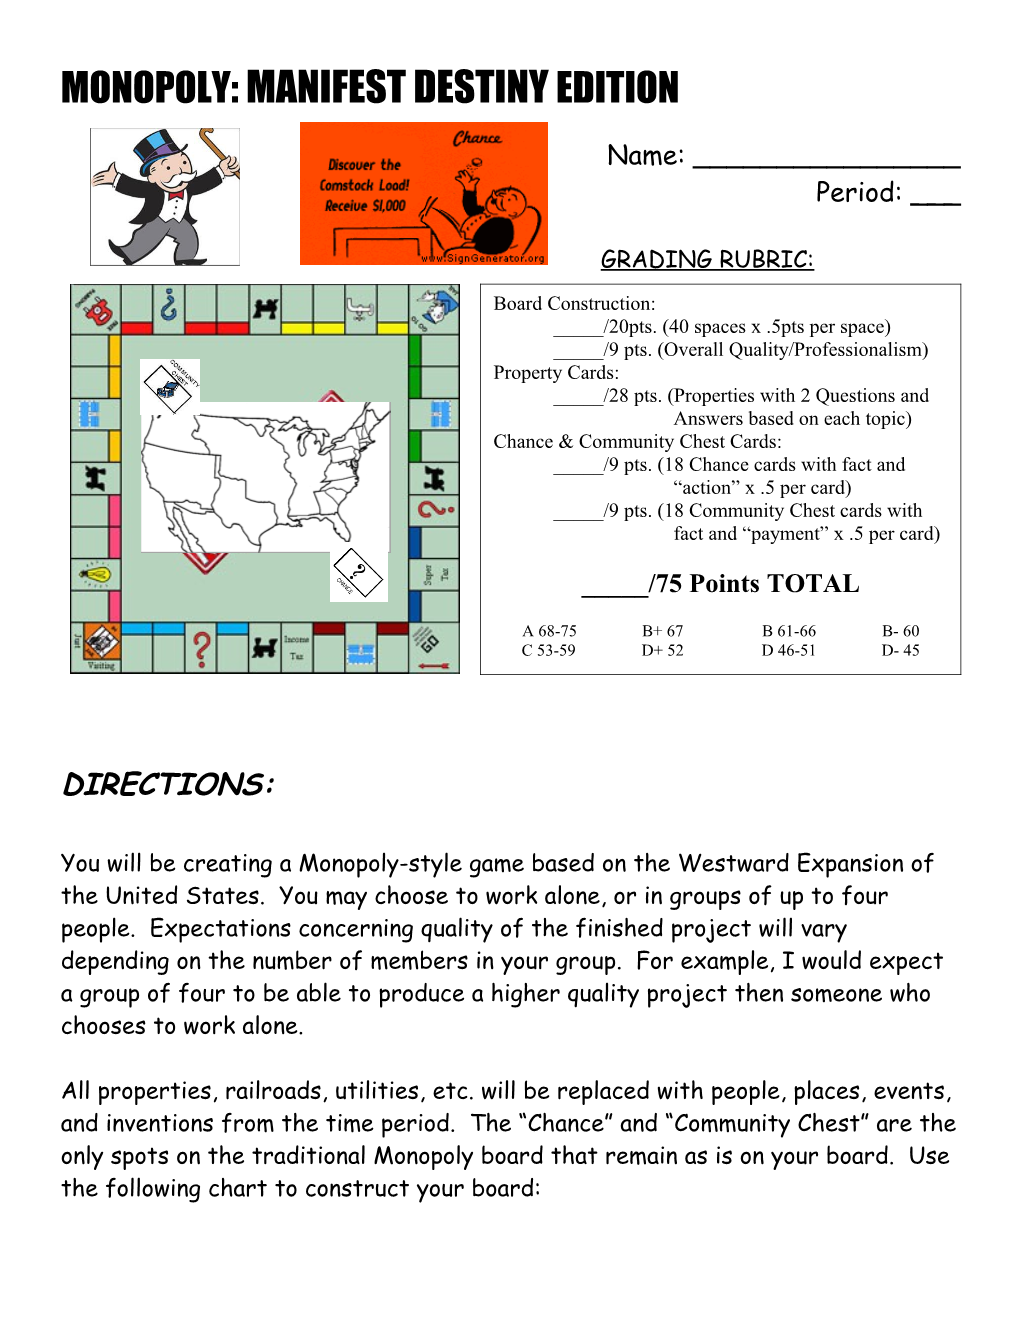 Monopoly: Westward Expansion Edition